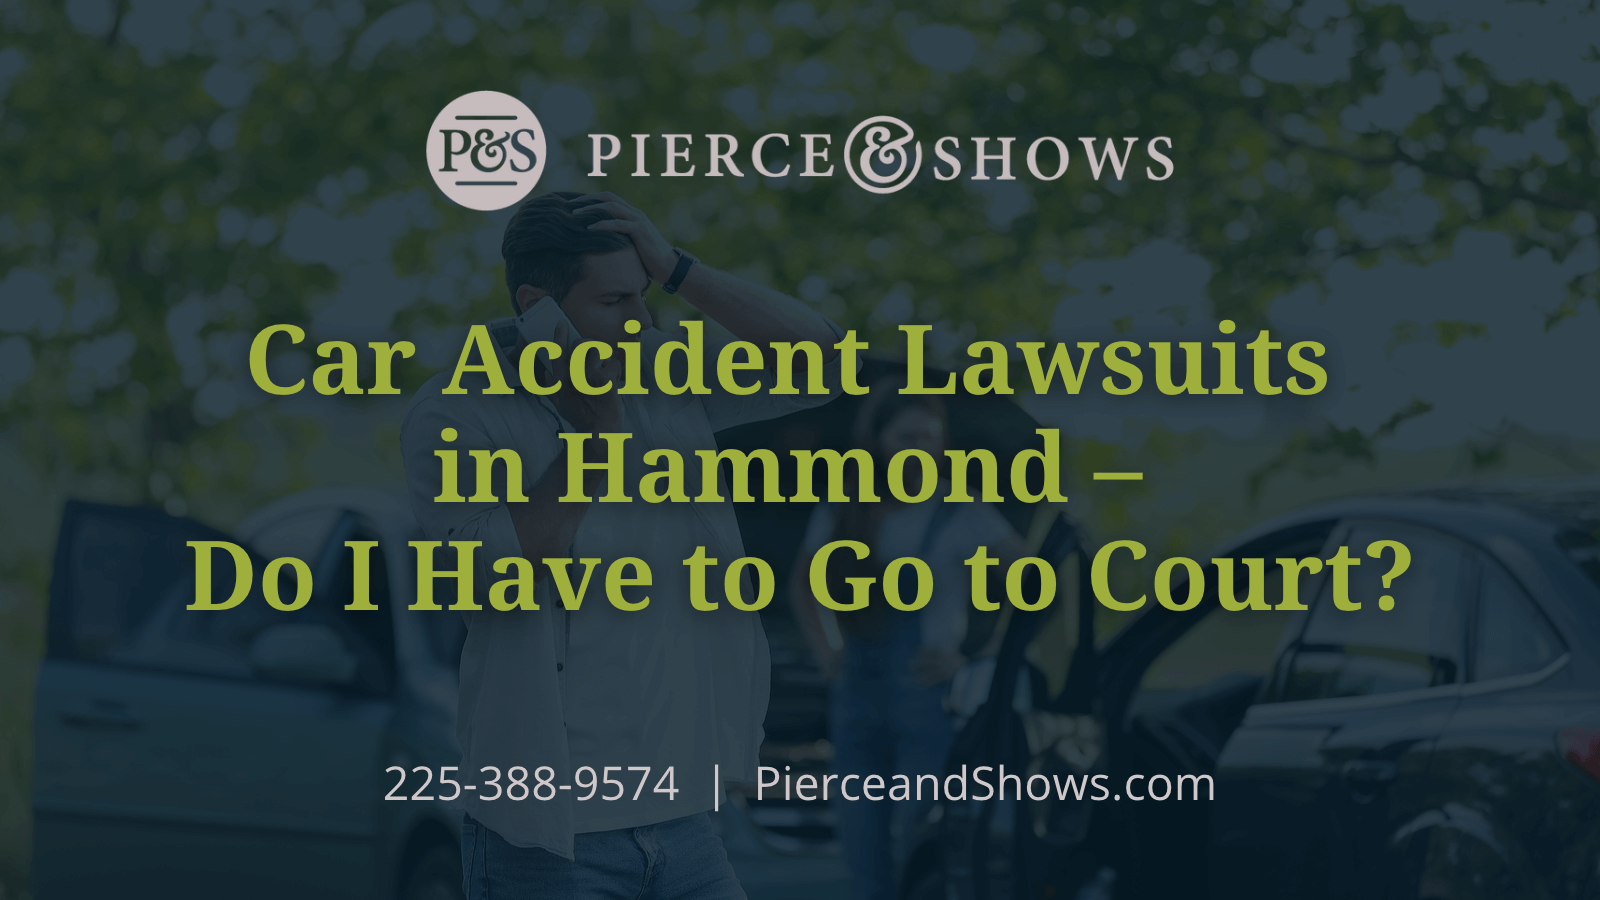 Car Accident Lawsuits in Hammond Do I Have to Go to Court - Baton Rouge Louisiana injury attorney Pierce & Shows